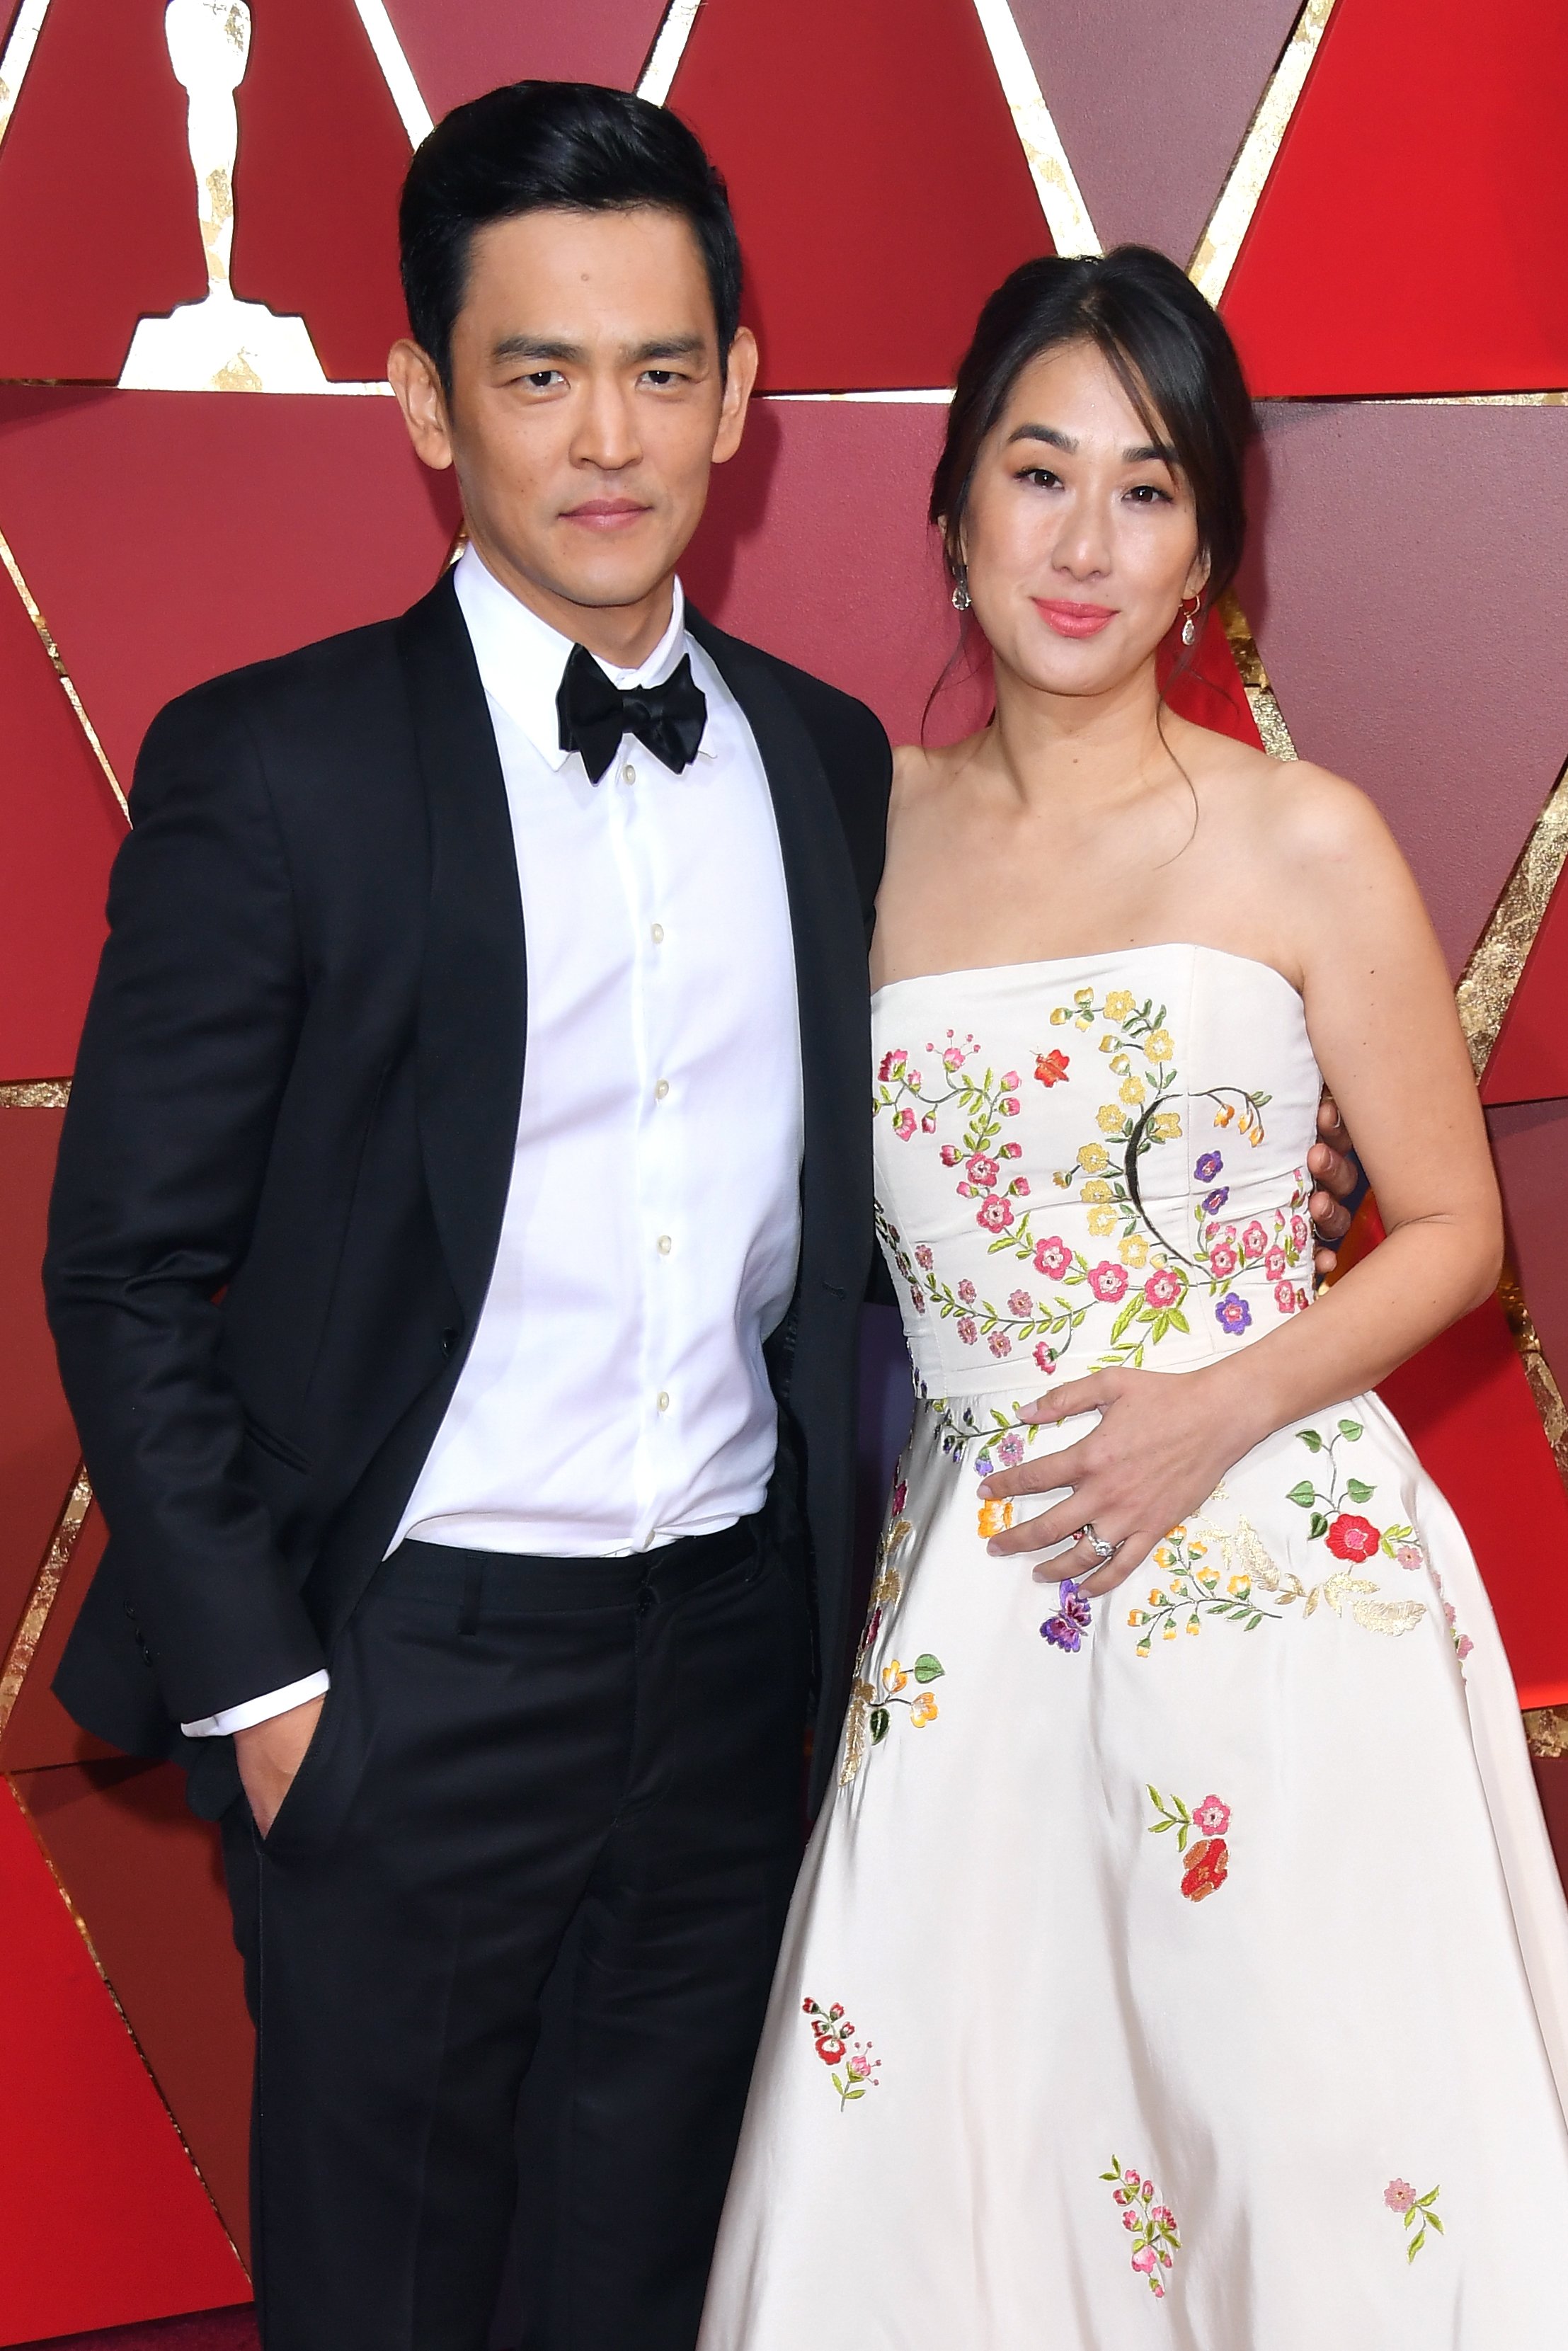 John Cho and Kerri Higuchi at the 89th Annual Academy Awards in 2017, in Hollywood, California. | Source: Getty Images